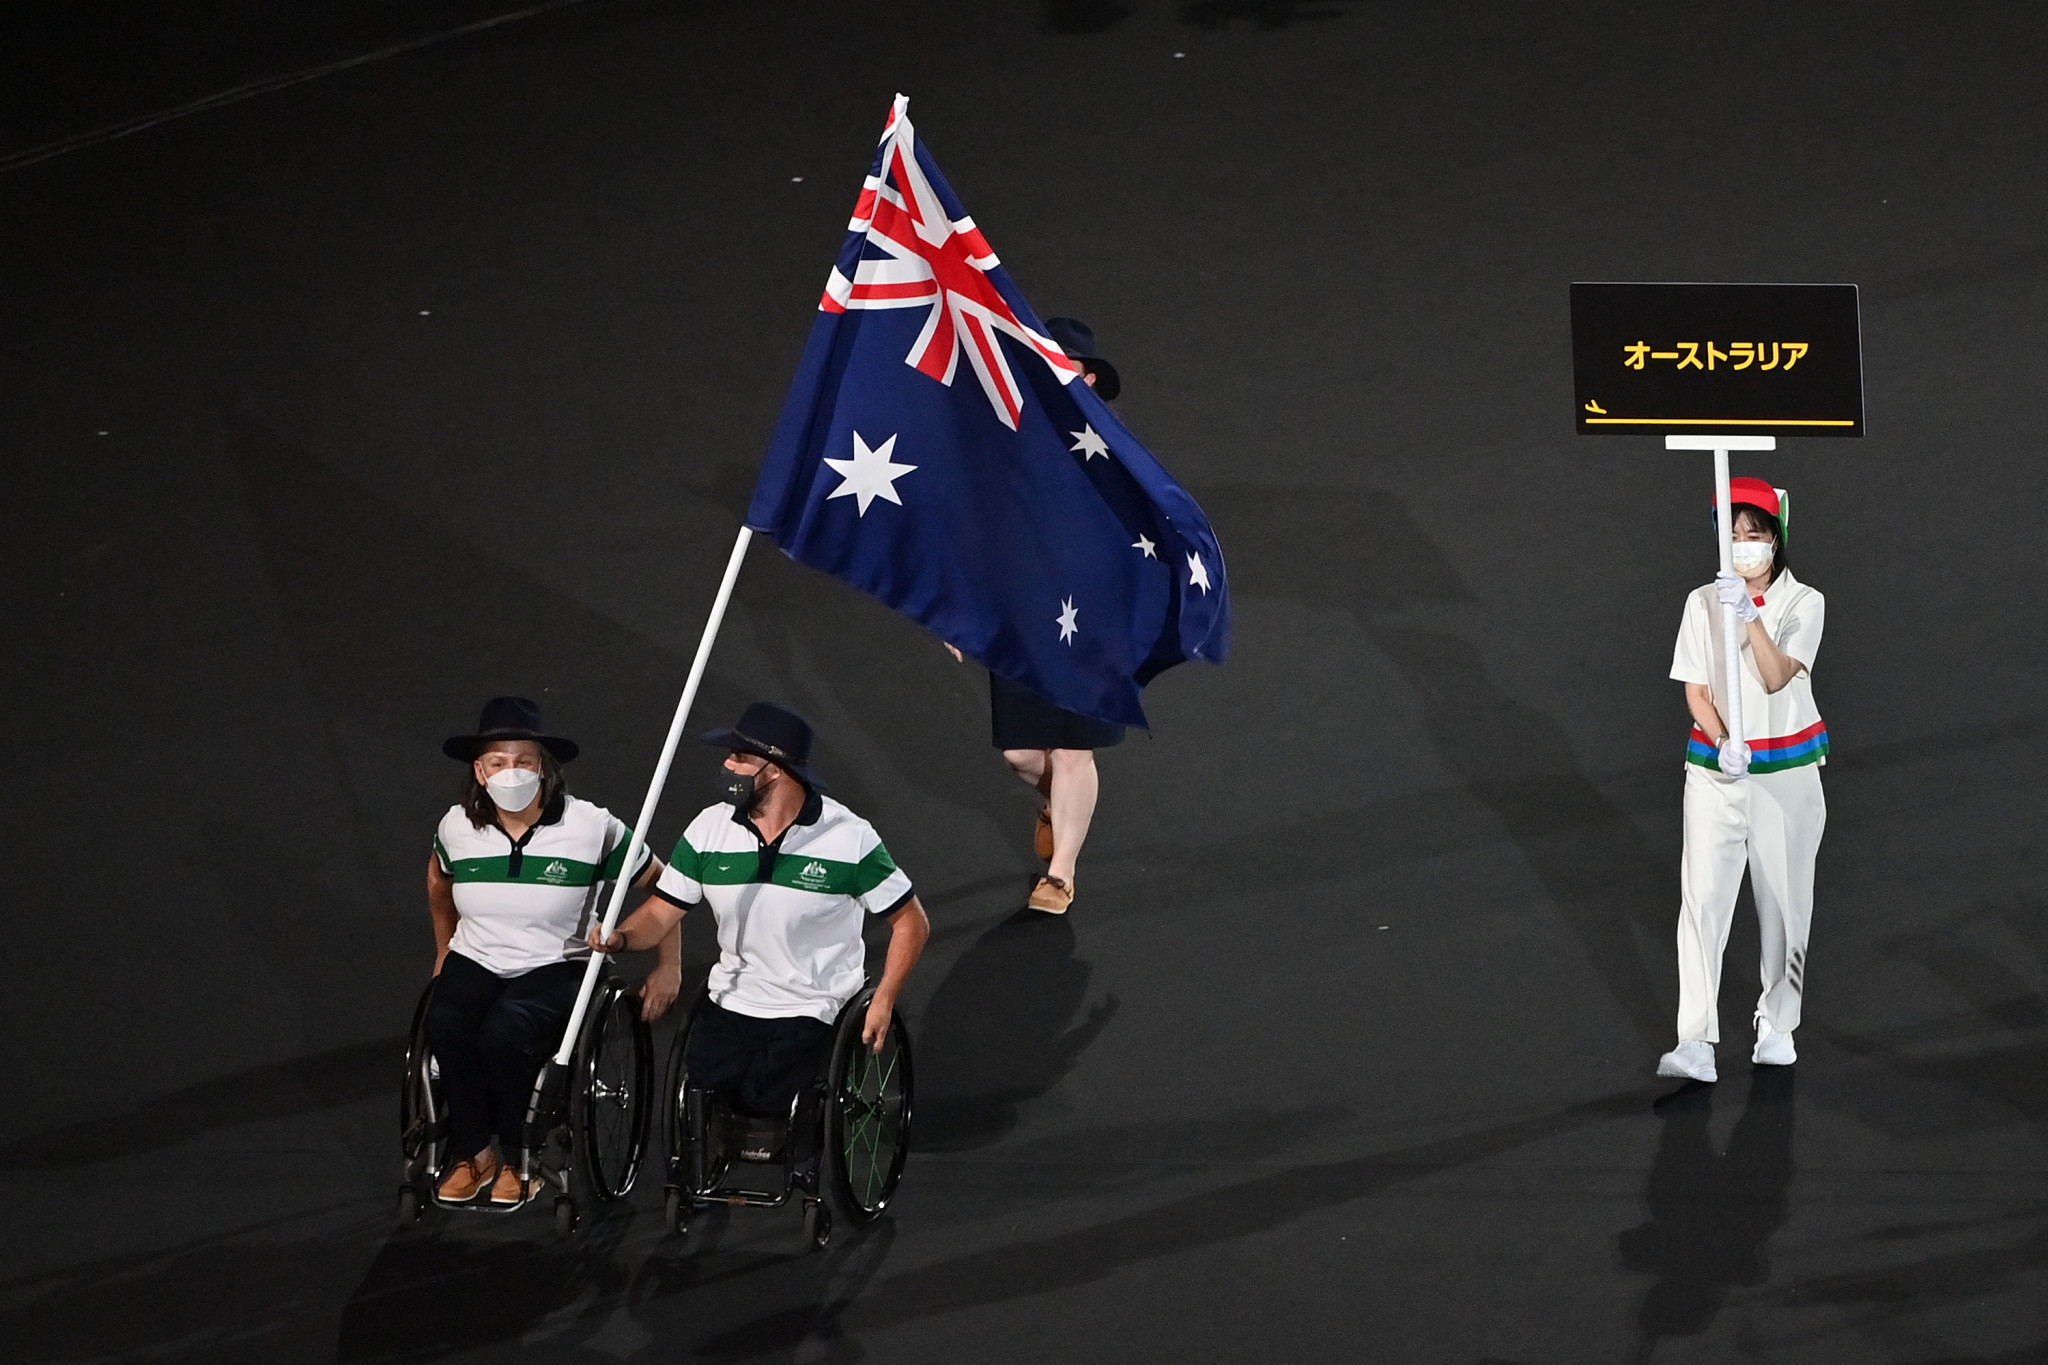 In Tokyo, co-captains Danni di Toro and Ryley Batt carried the flag as Australia's largest overseas team at a Paralympics returned with 80 medals ©Getty Images